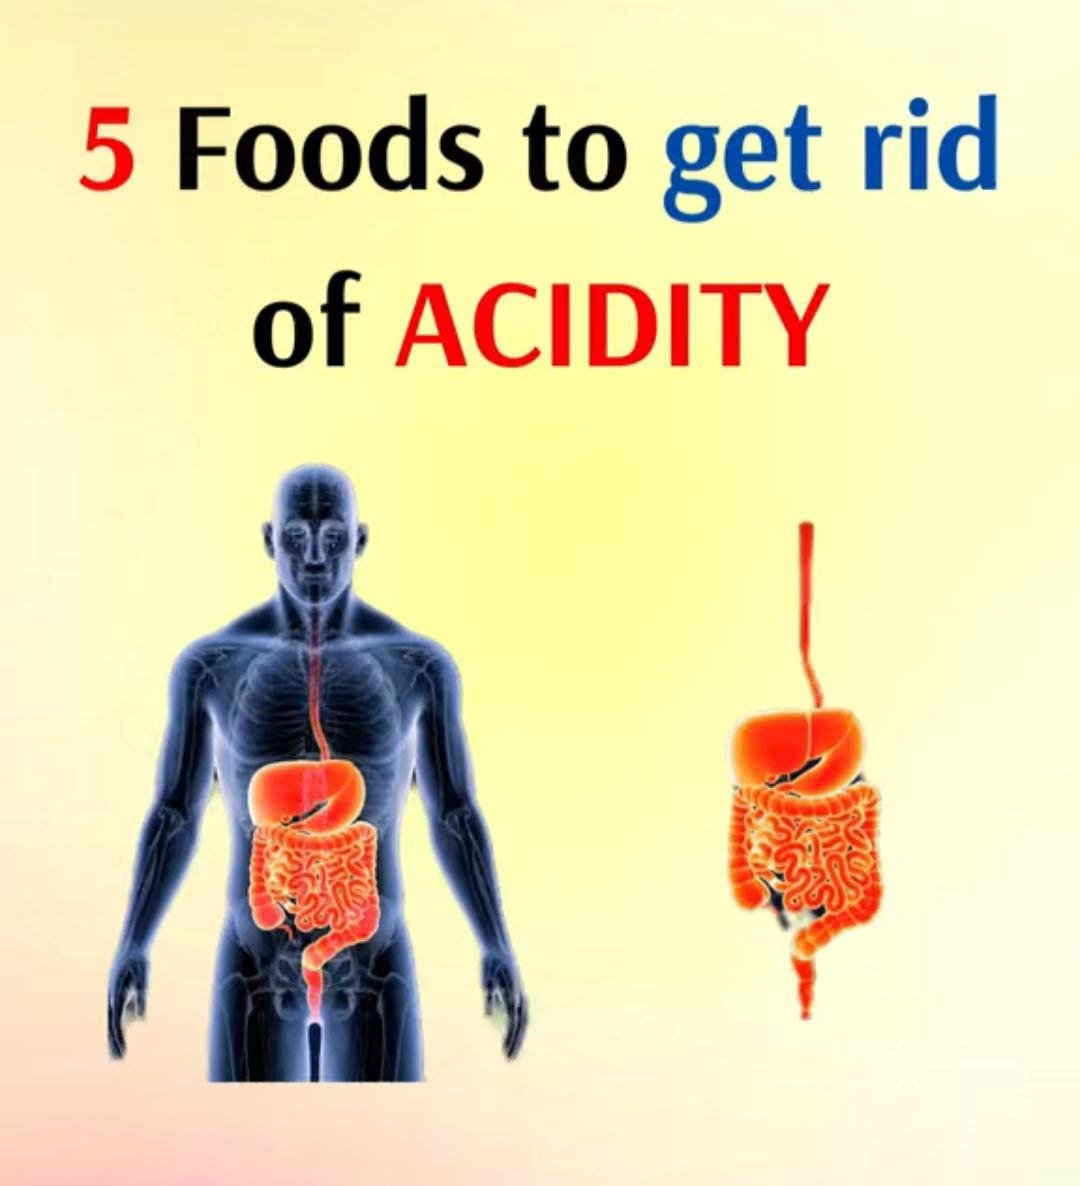 5 foods to reduce acidity in body